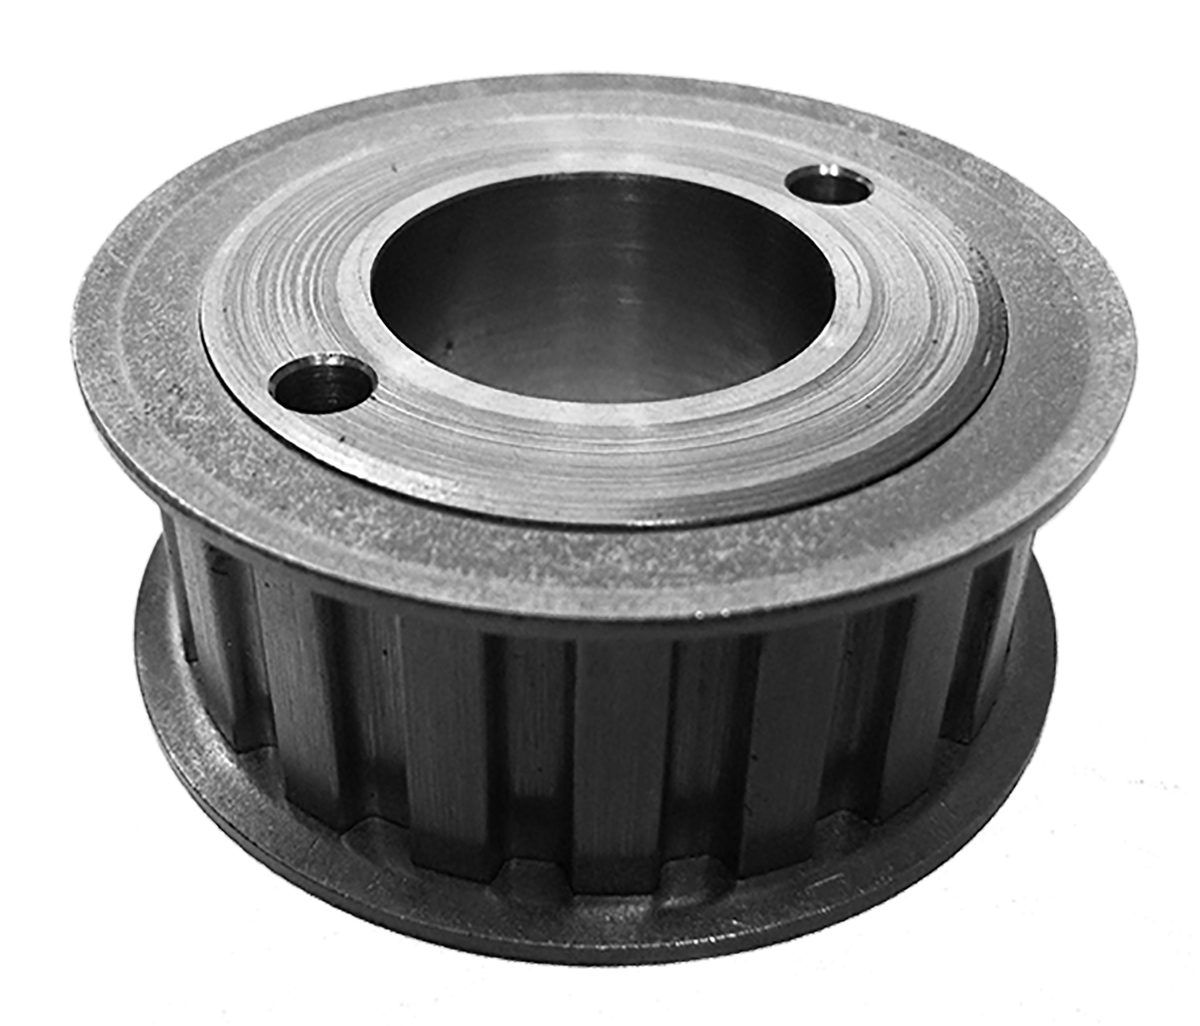 20LG075 - Steel Imperial Pitch Pulleys